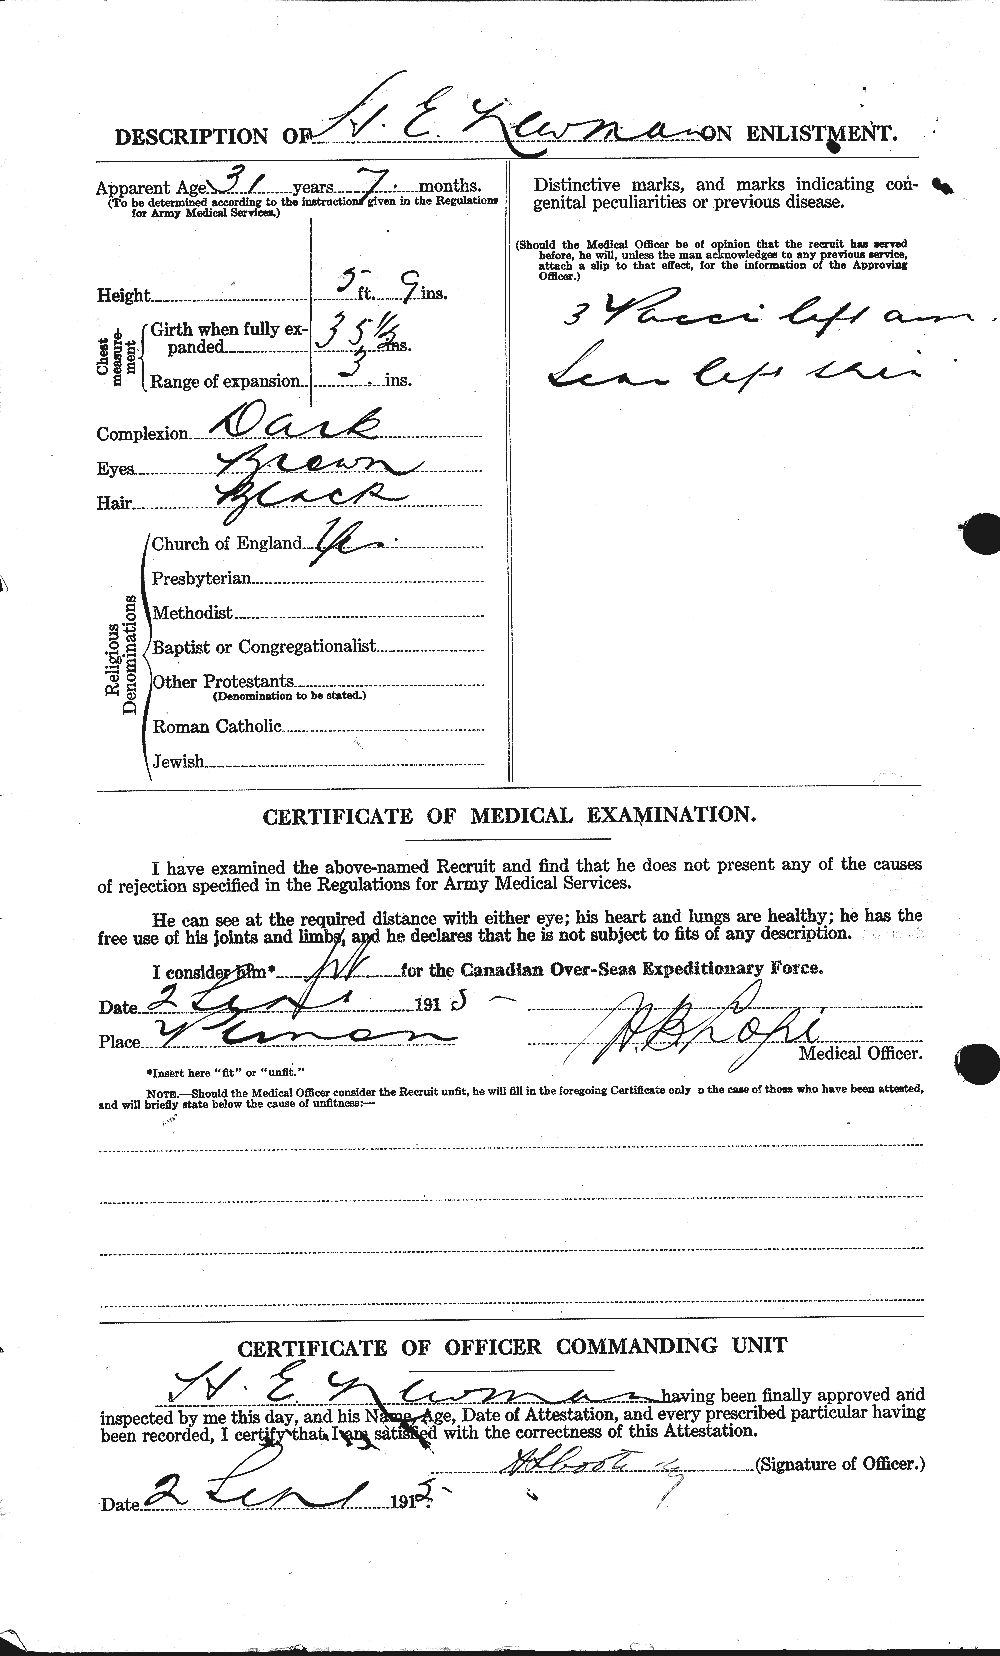 Personnel Records of the First World War - CEF 548124b